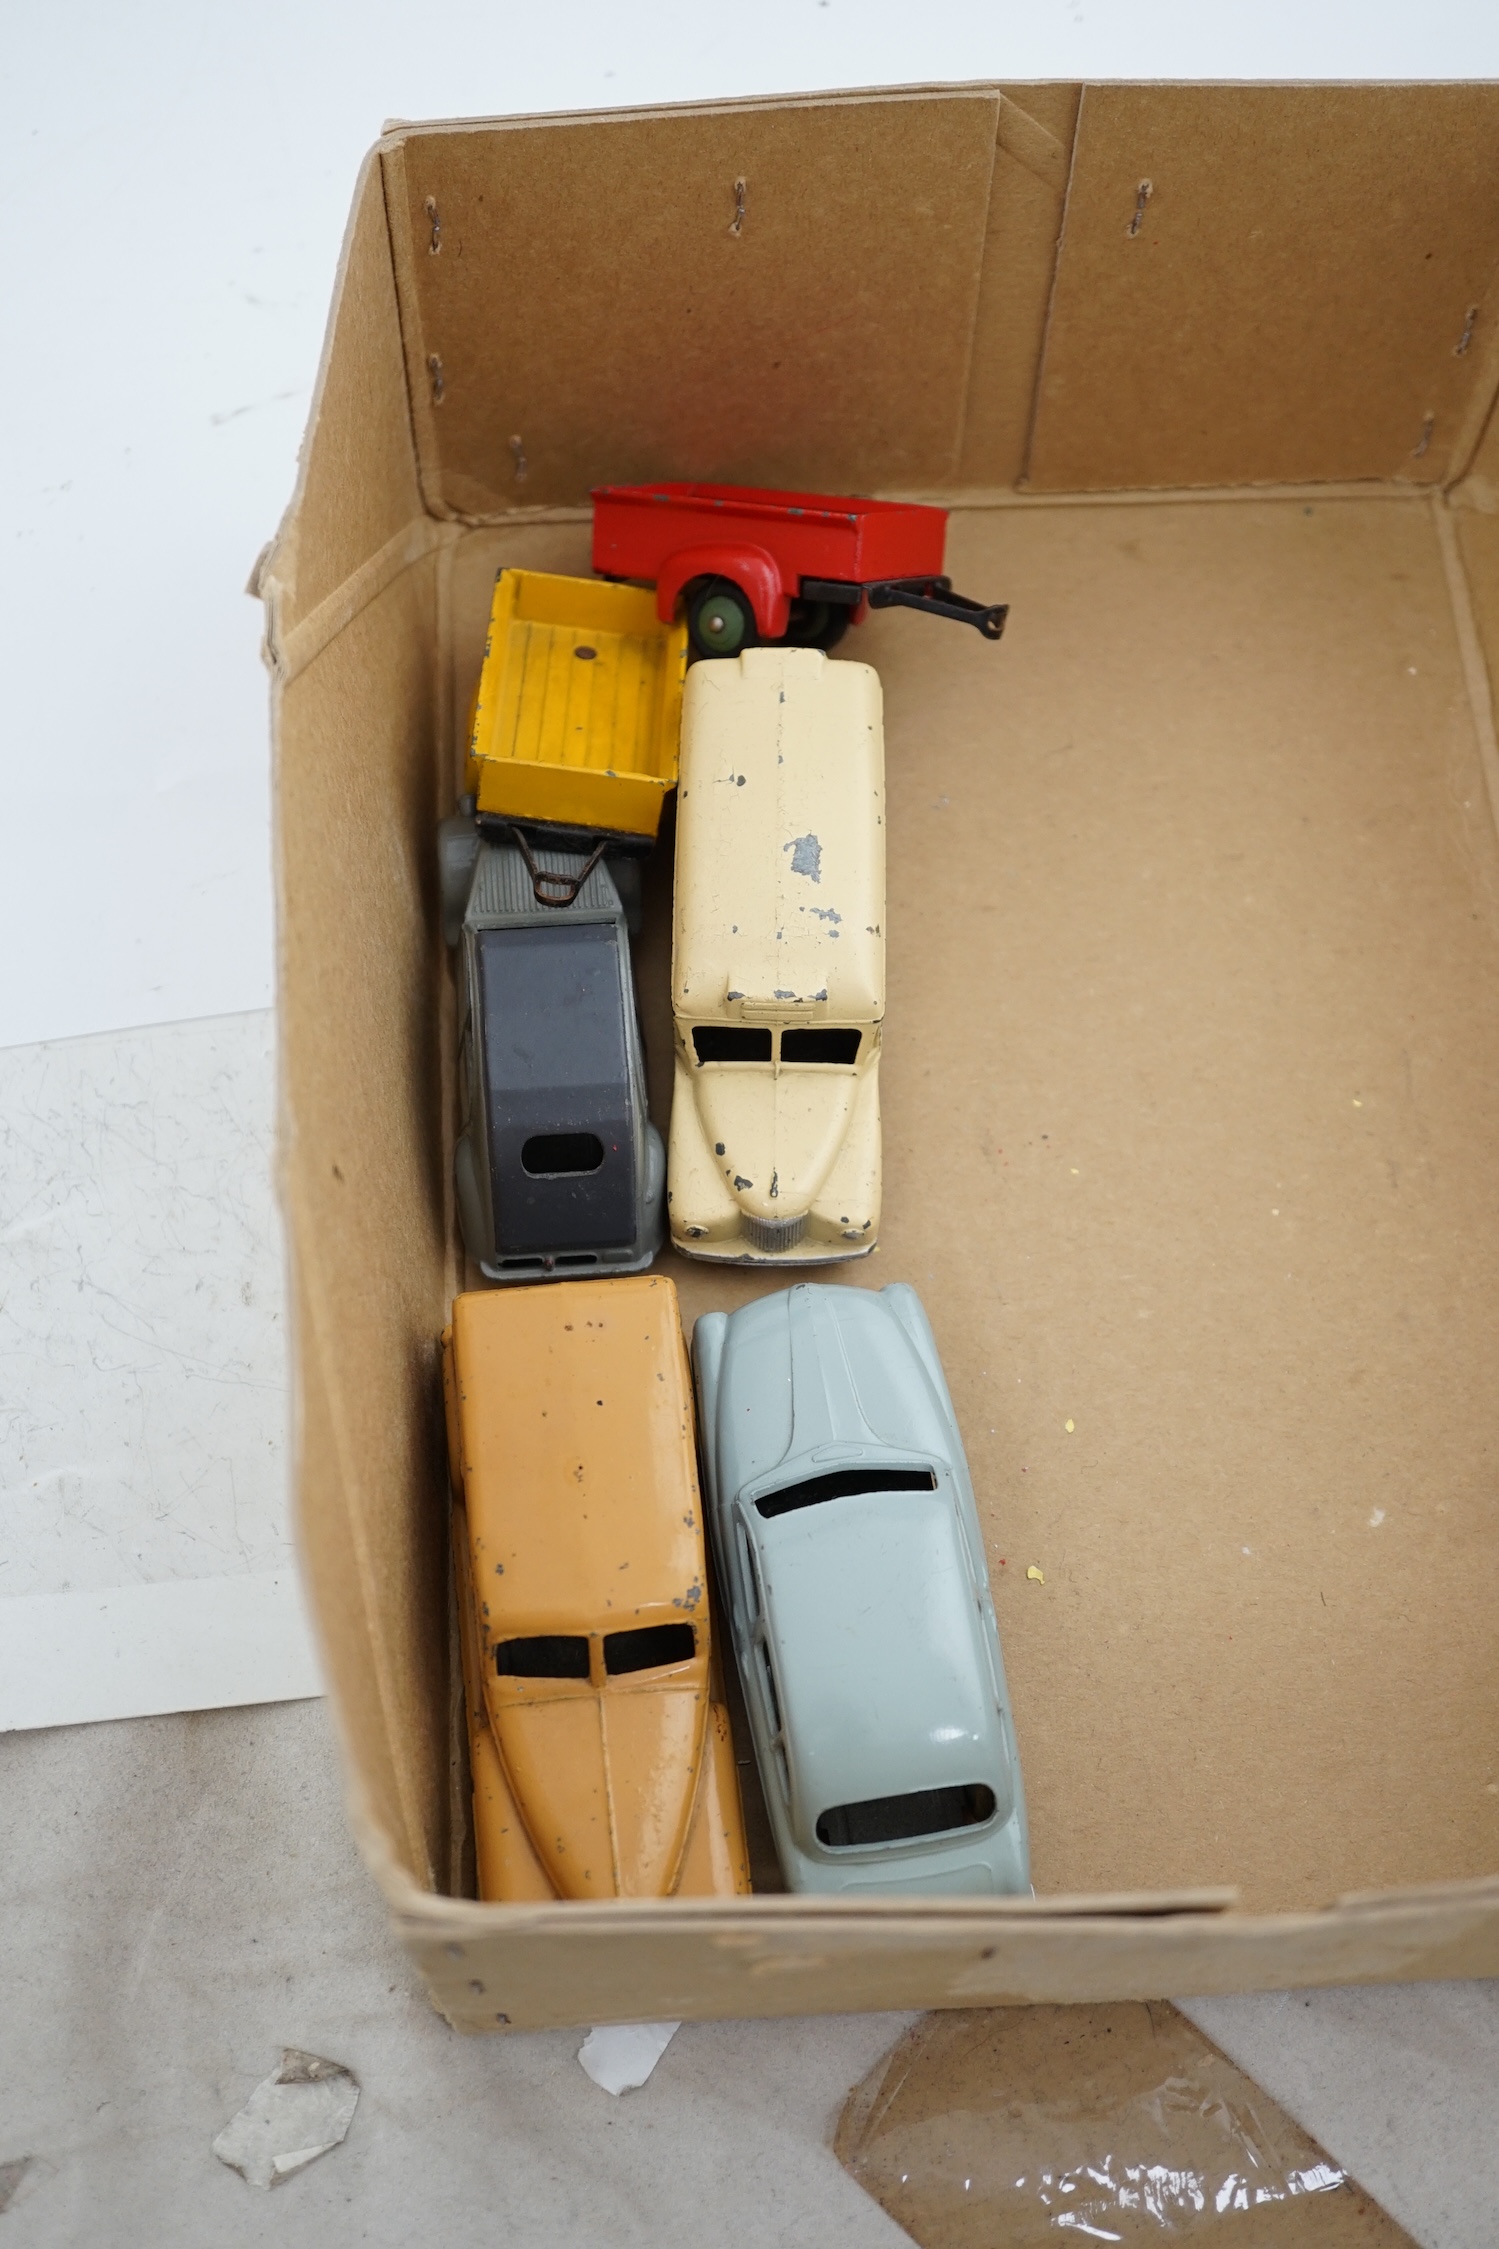 Twenty-seven Dinky Toys and French Dinky Toys, together with other diecast vehicles by Spot-On, Corgi, Matchbox Series, Mercury, CIJ, etc.